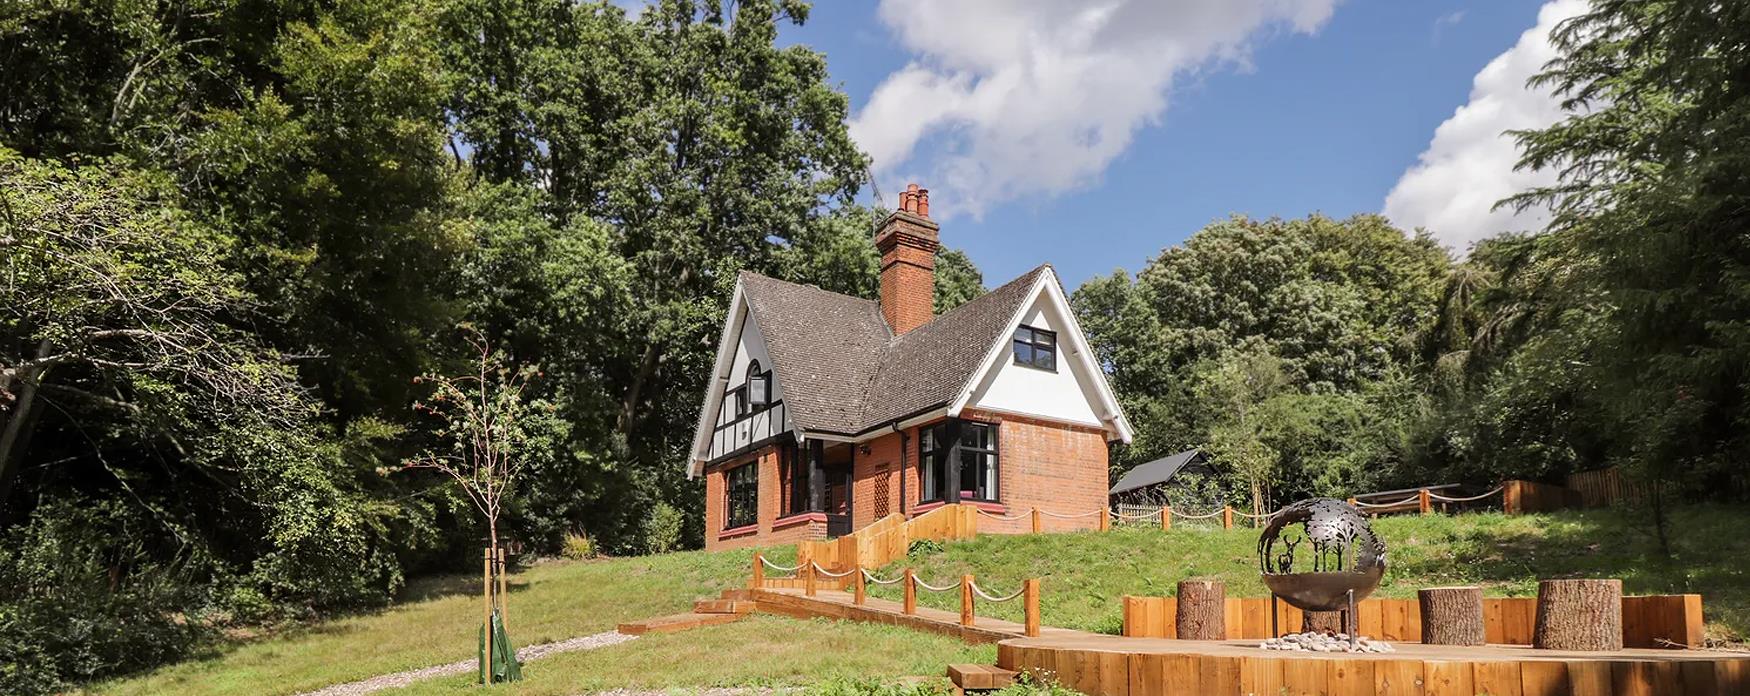 Baldwins Cottage in the middle of Epping Forest is a great place to stay and unwind.